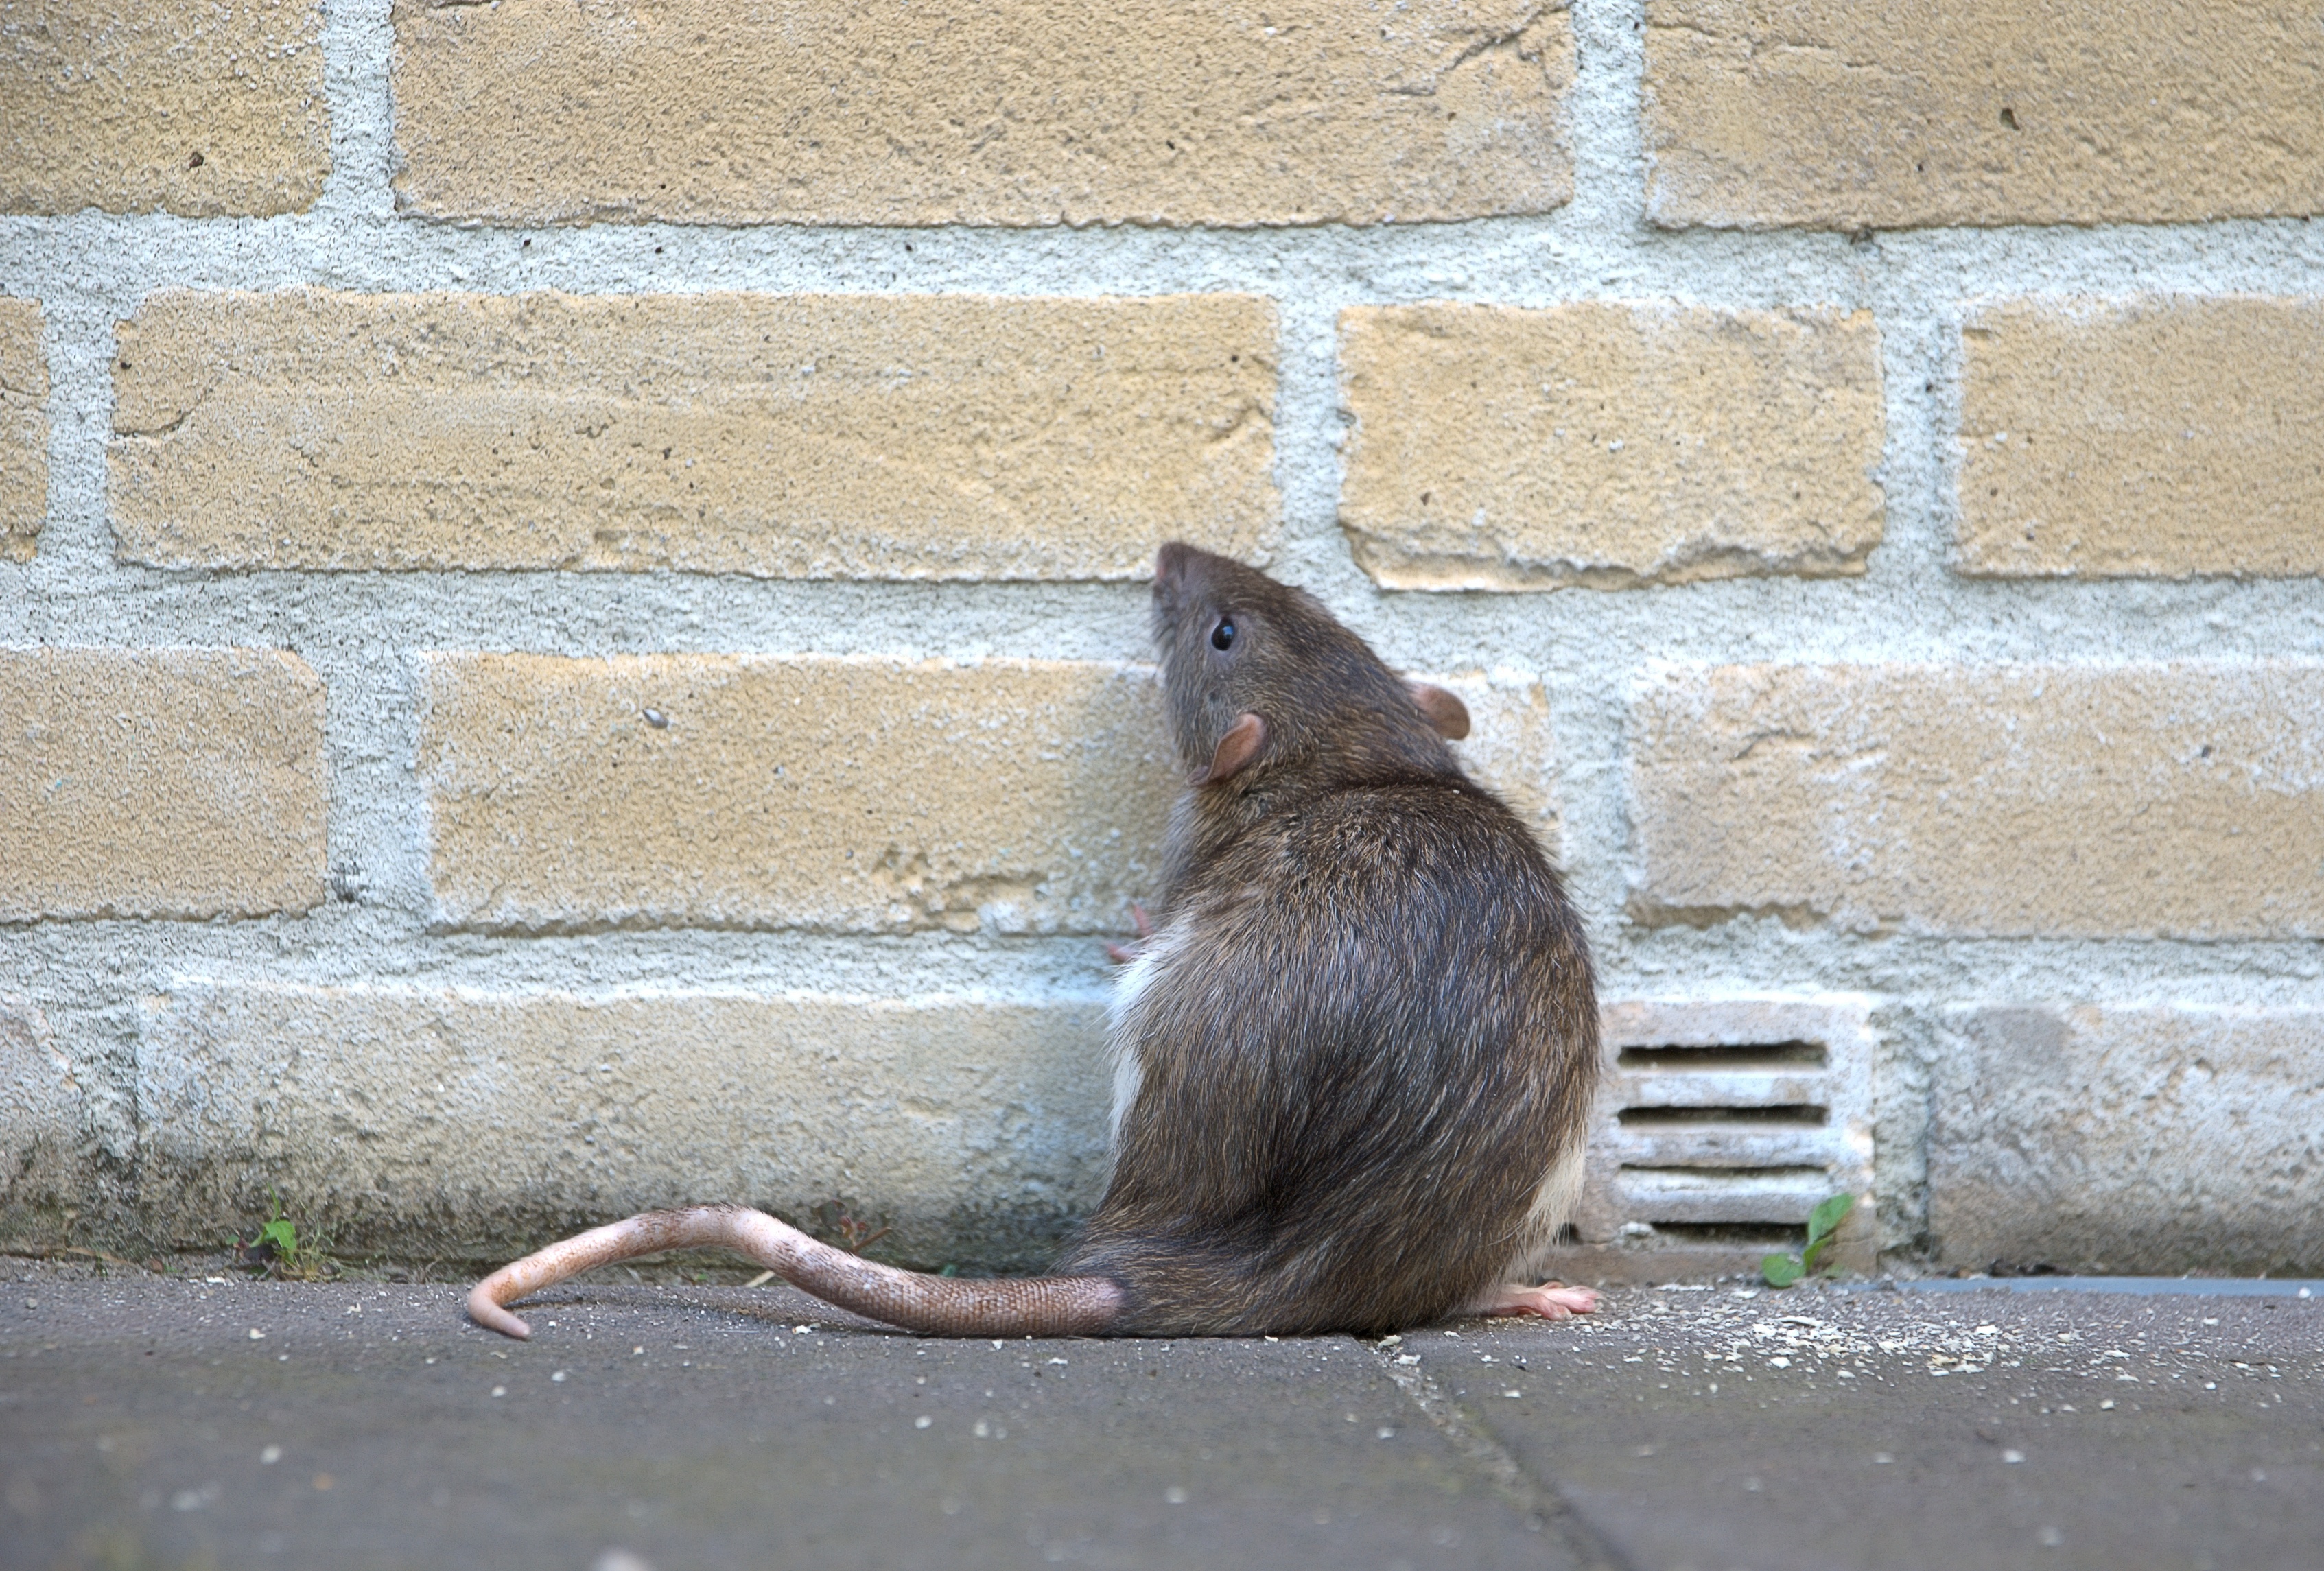 Do Ultrasonic Pest Repellers Work to Control Rats?